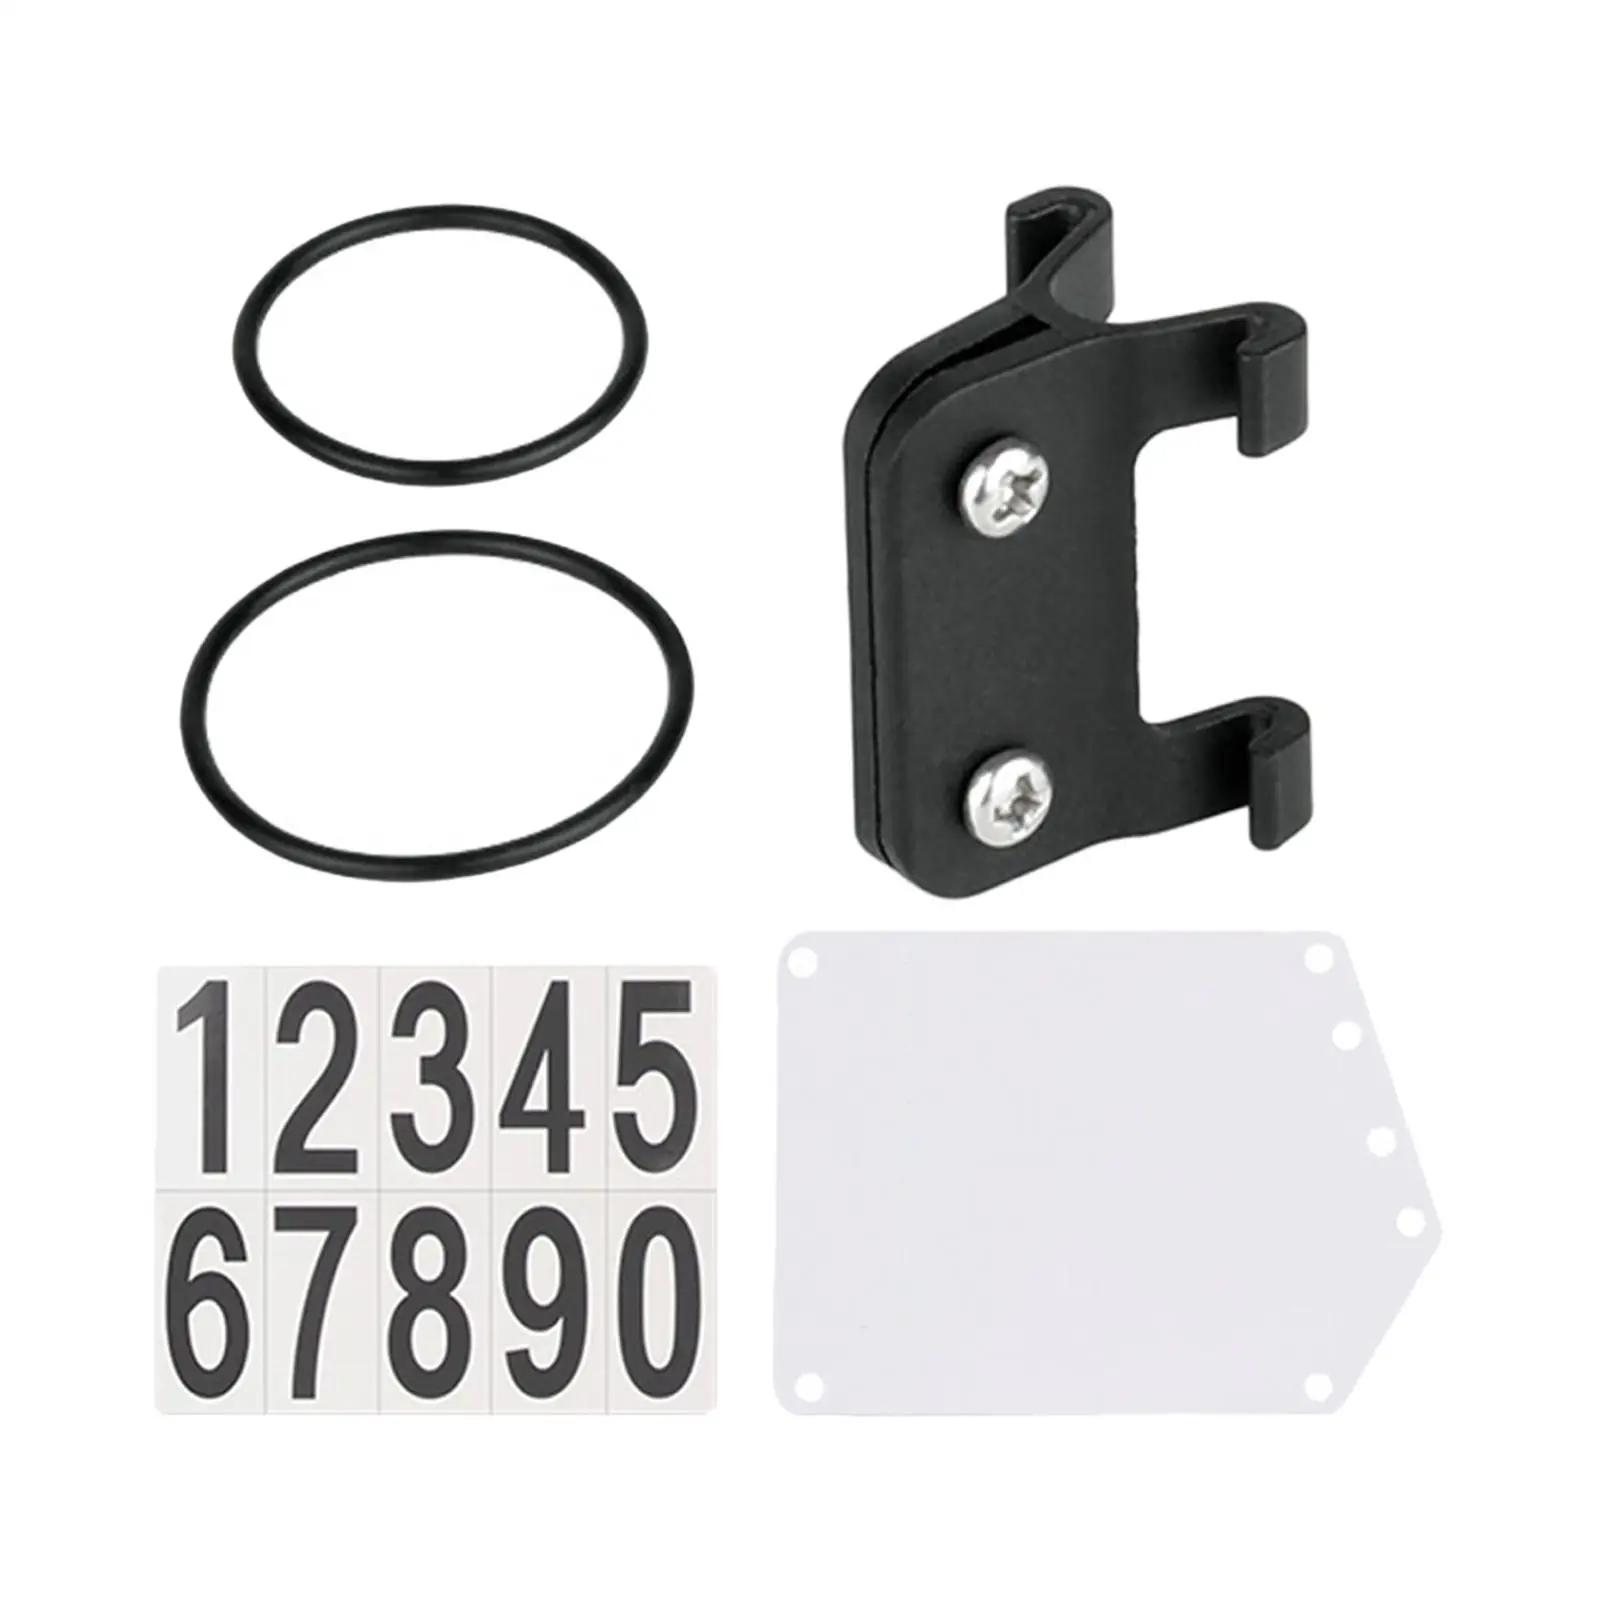 Racing Number Plate and Holder with Rubber Bands Bracket Quick Release Race Cards Bracket for Cycling Triathlon Race Road Bike